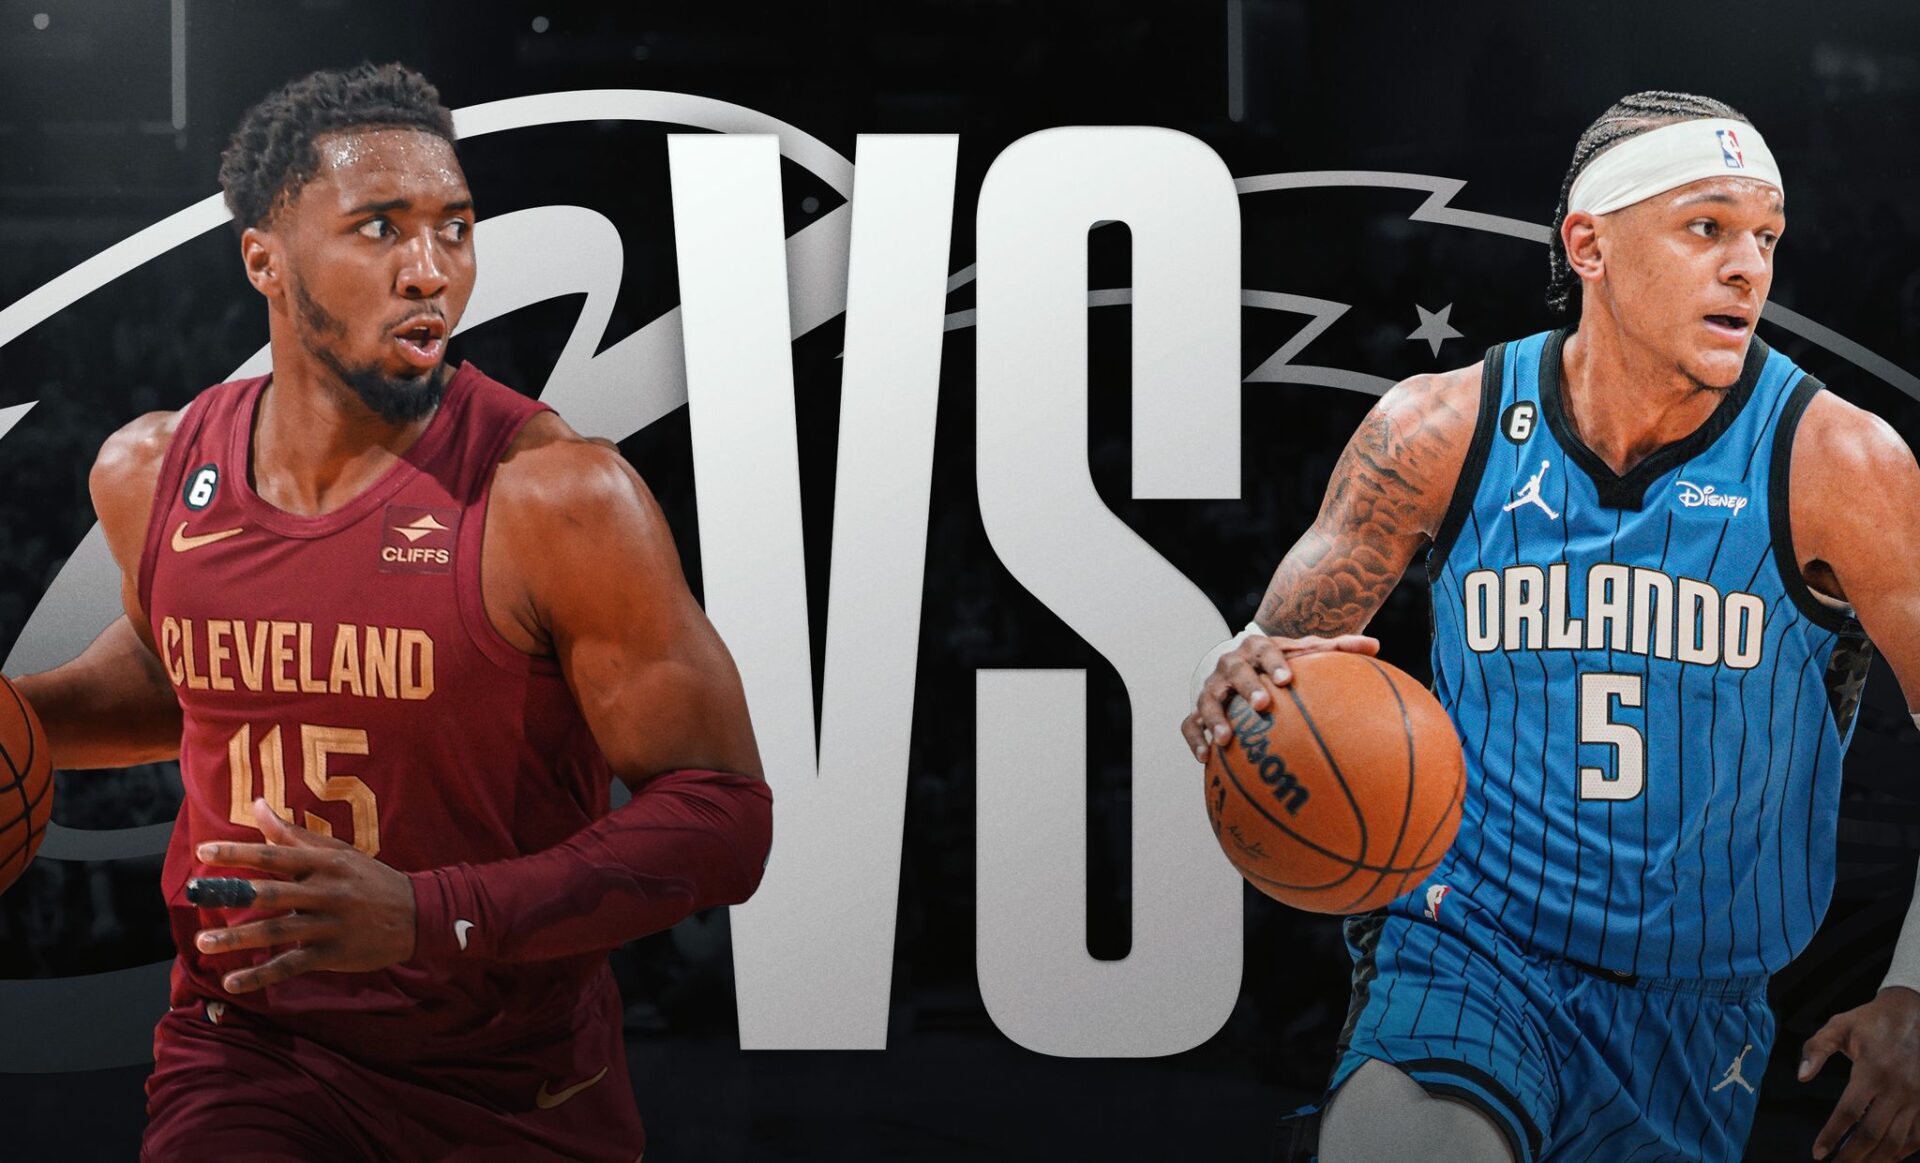 Forget Everything You Think You Know: Why the Cavs-Magic Playoff Opener Could Be the Most Surprising Upset of the Year